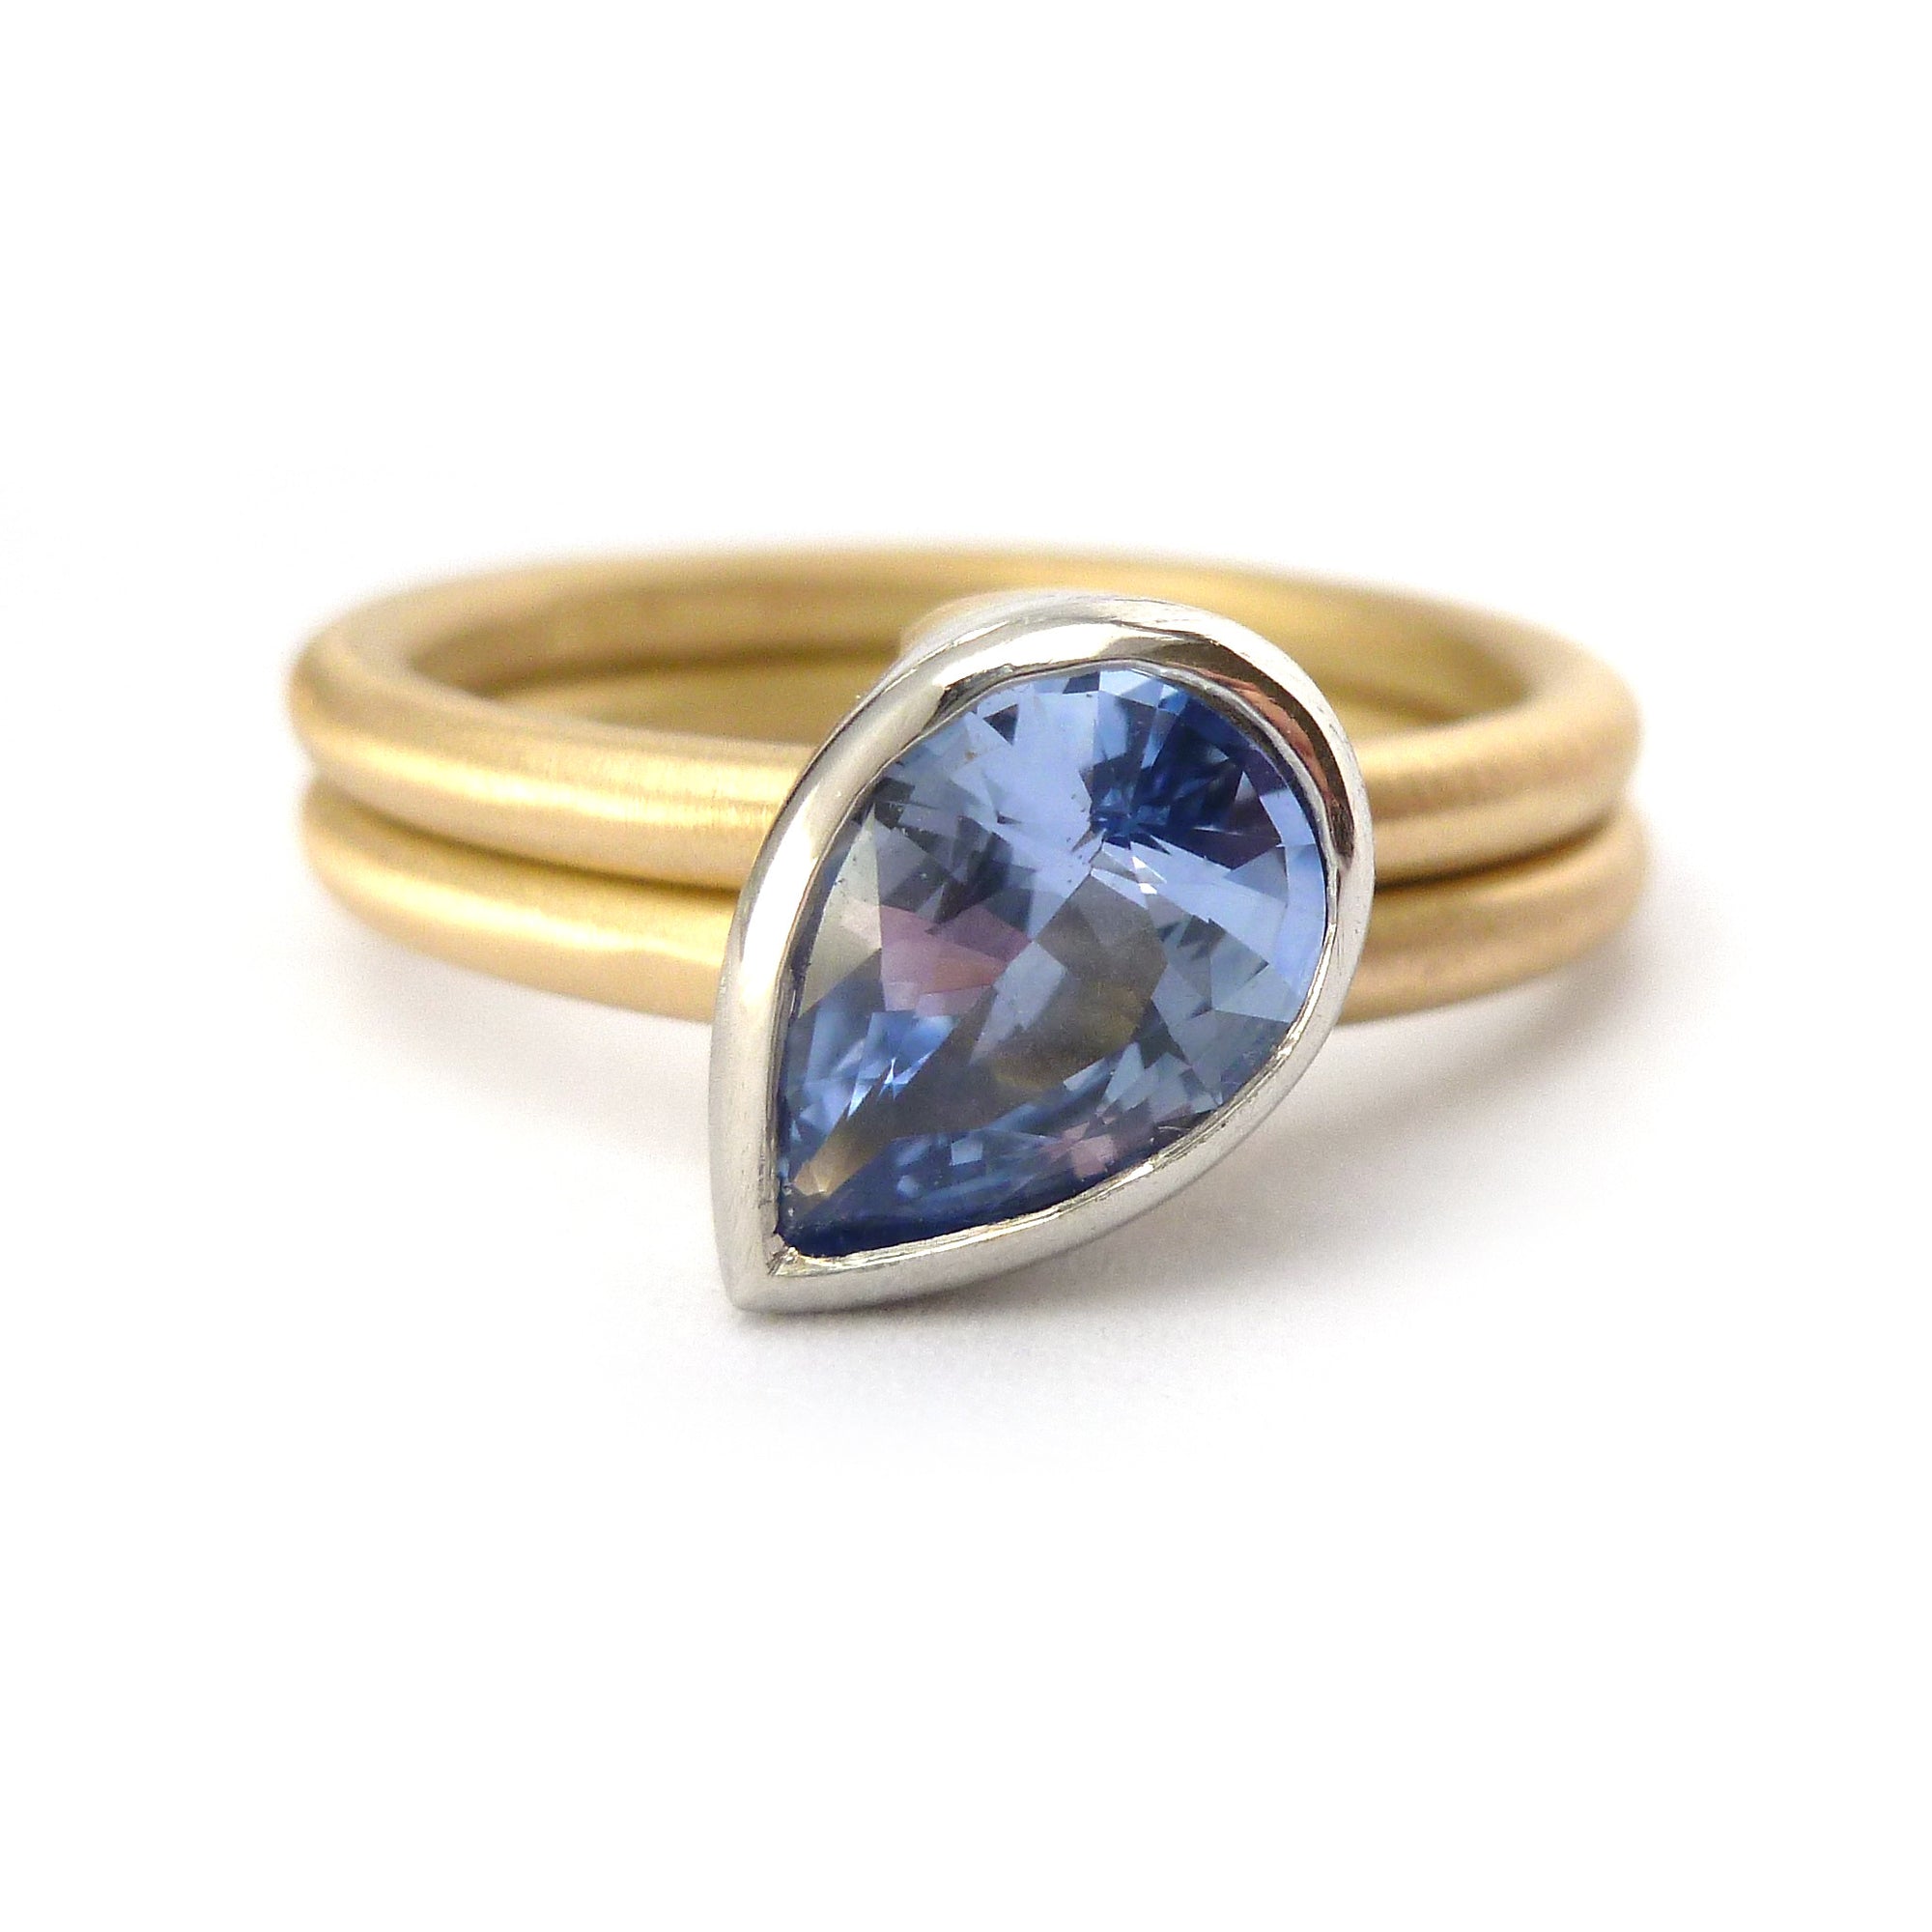 Unique, bespoke and modern statement platinum and gold and pear shape cornflower blue sapphire stacking ring set handmade by designer maker Sue Lane Jewellery